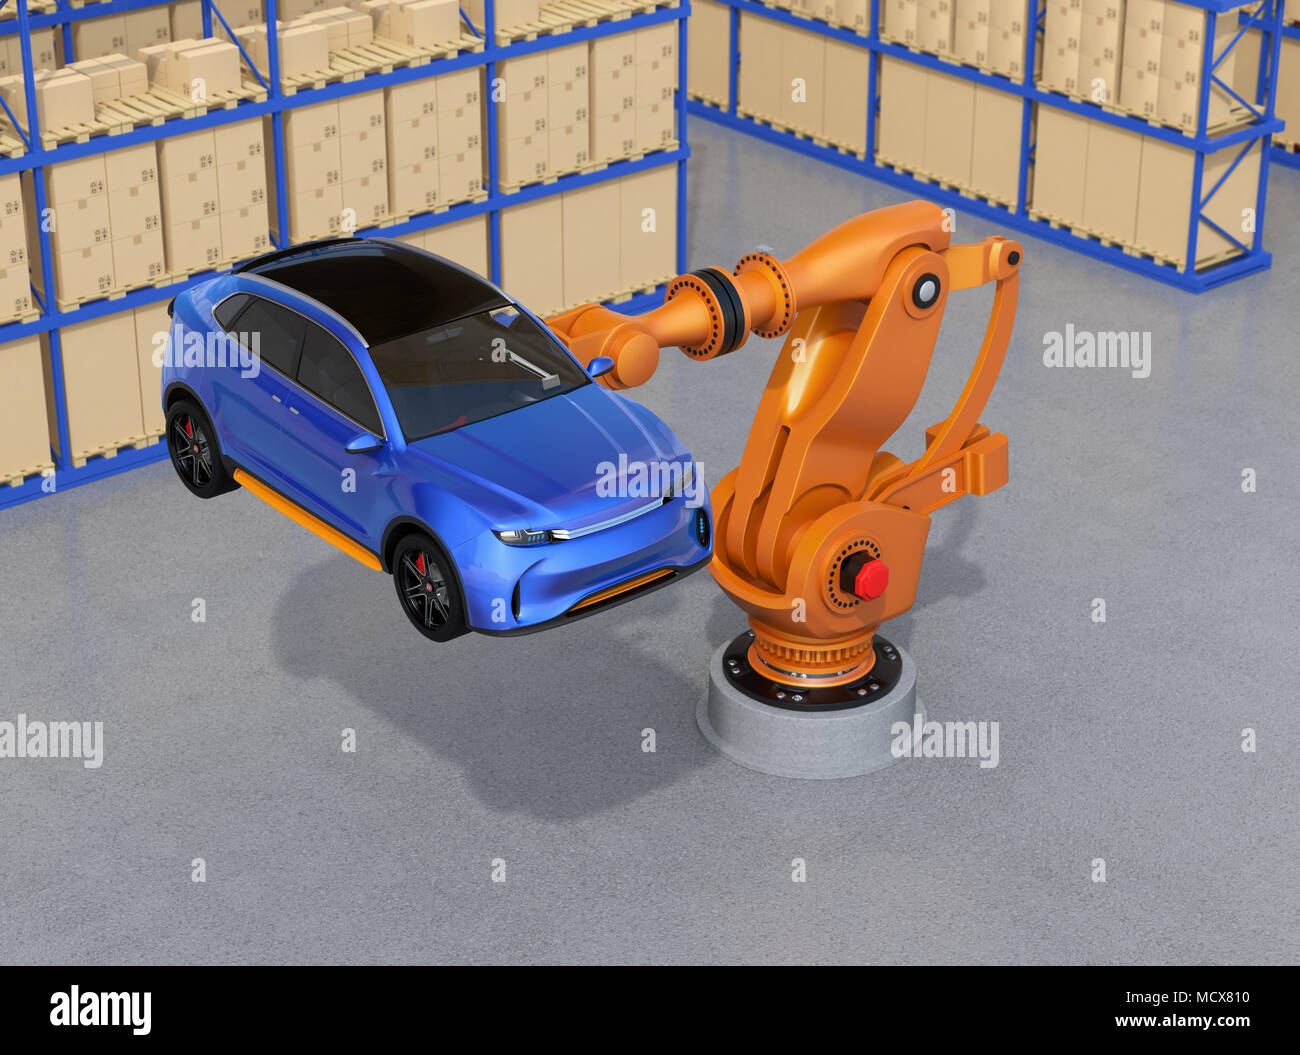 Orange heavyweight robotic arm carrying blue SUV in the assembly factory. 3D rendering image. Stock Photo